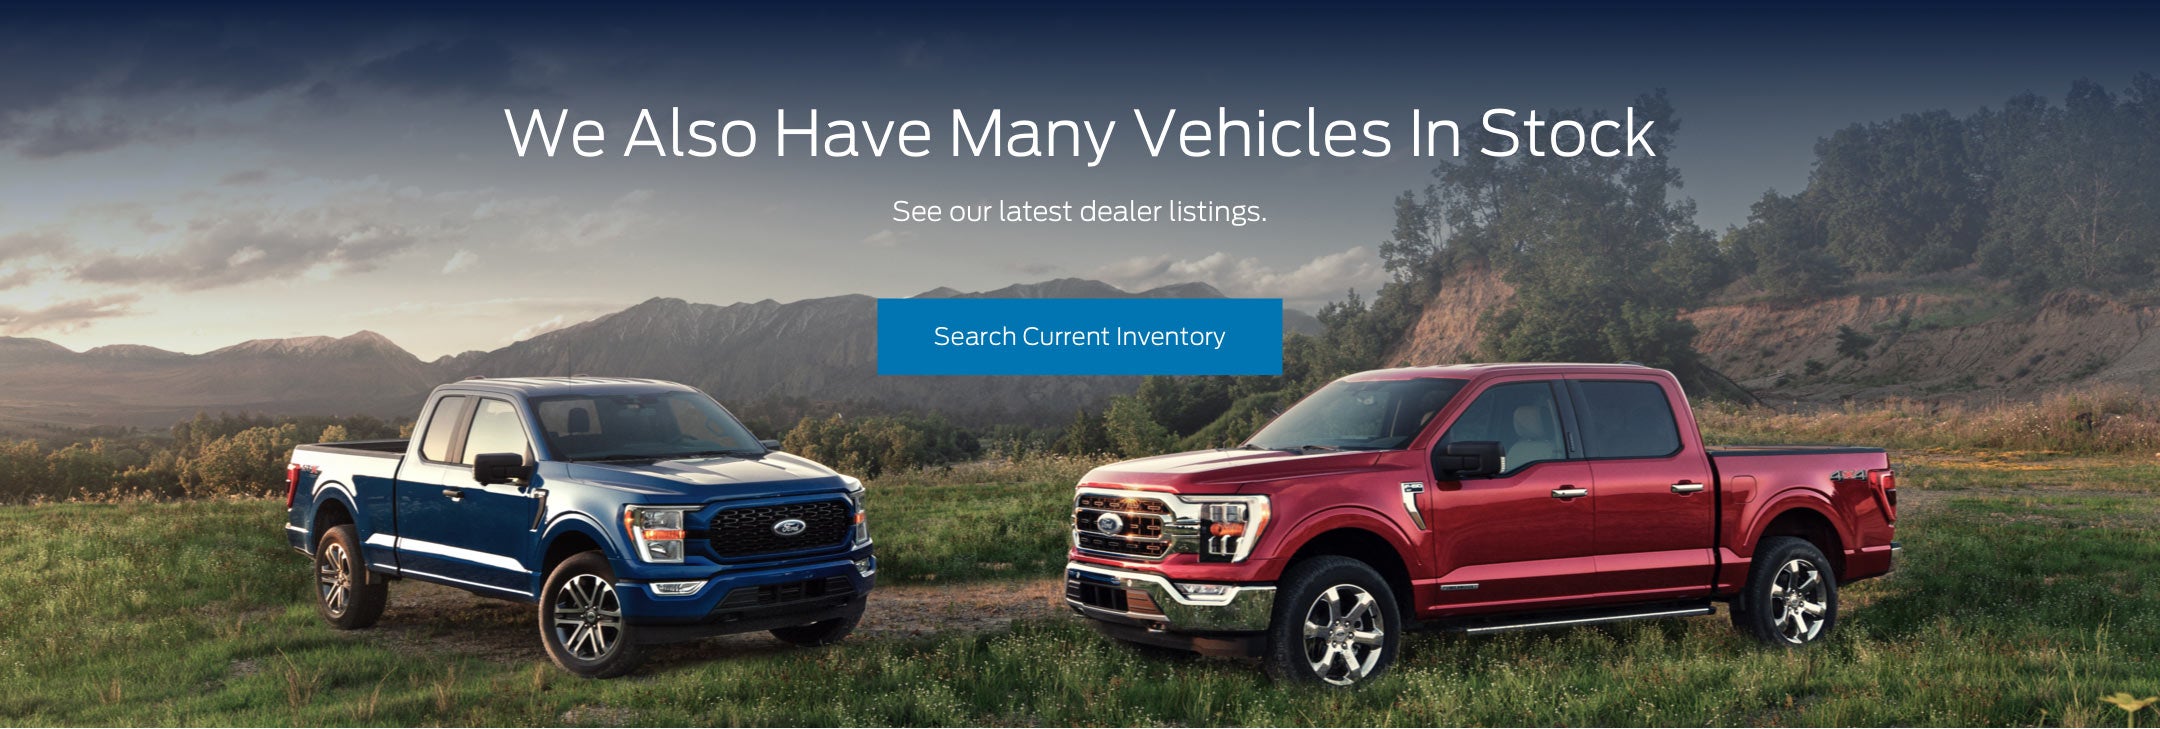 Ford vehicles in stock | Capital Ford of Charlotte in Charlotte NC